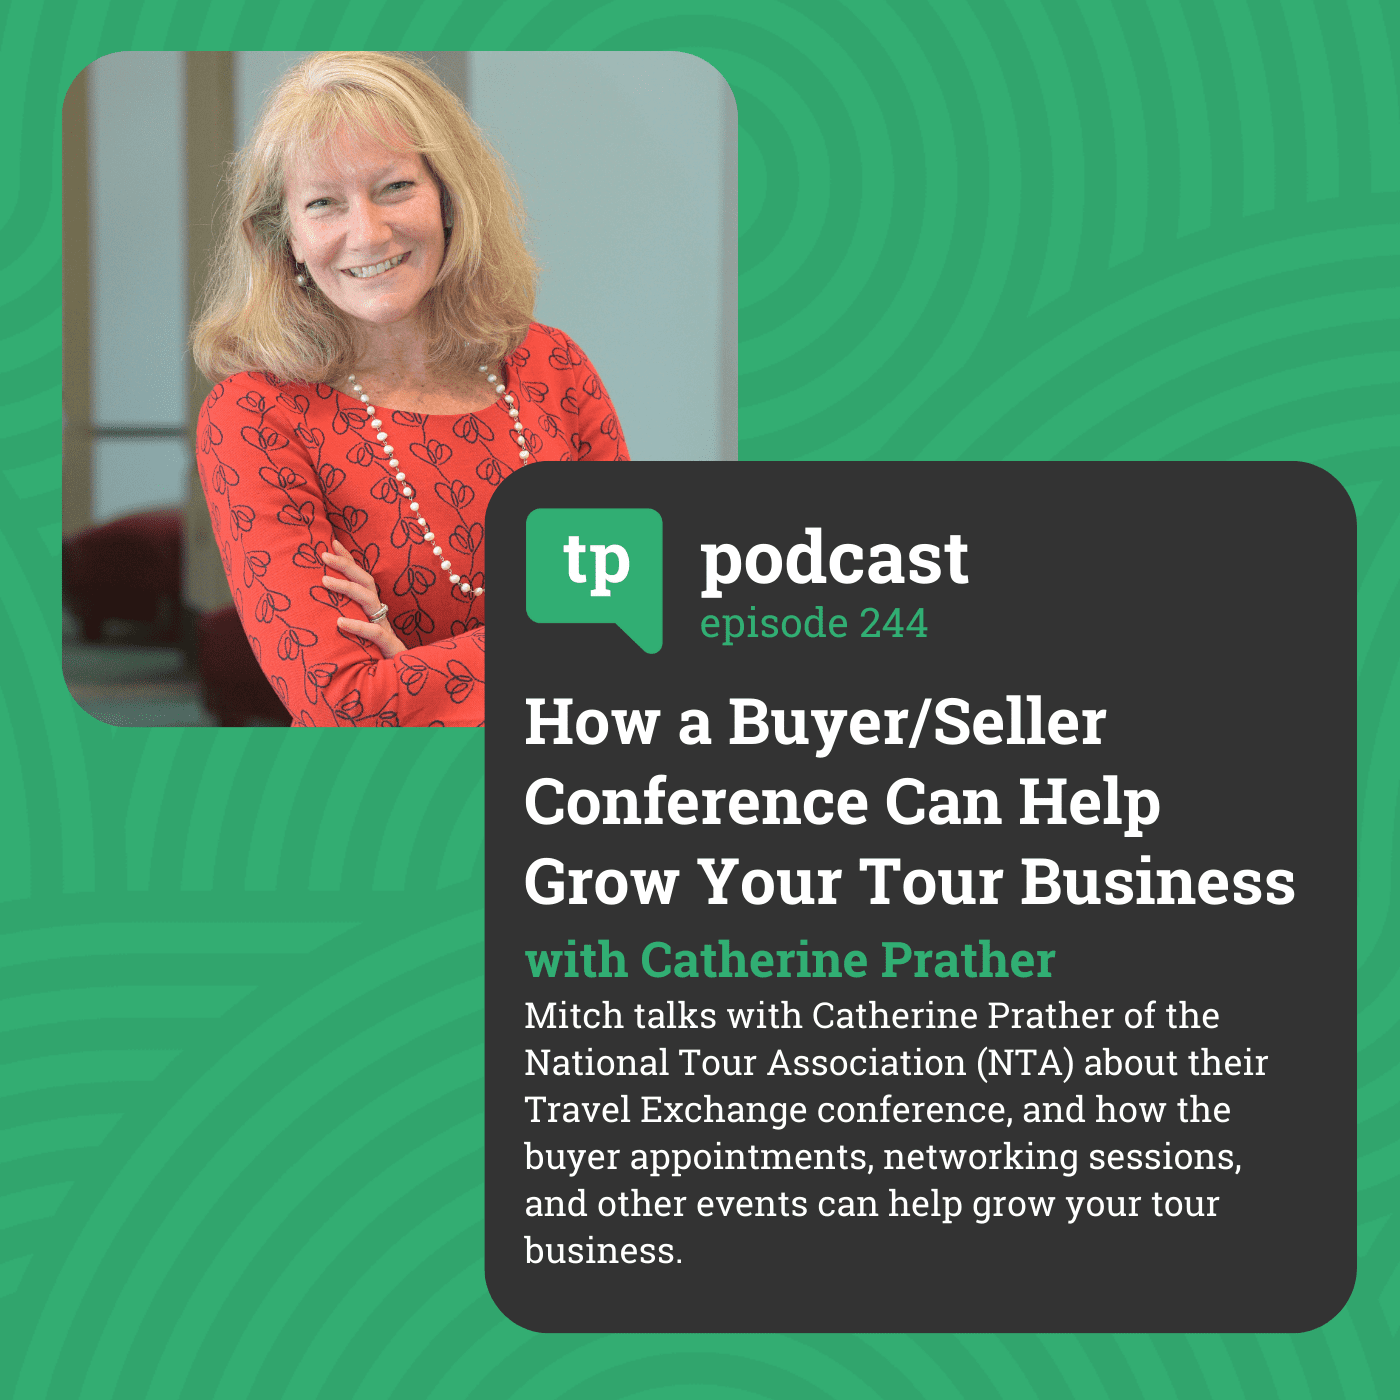 How a Buyer/Seller Conference Can Help Grow Your Tour Business